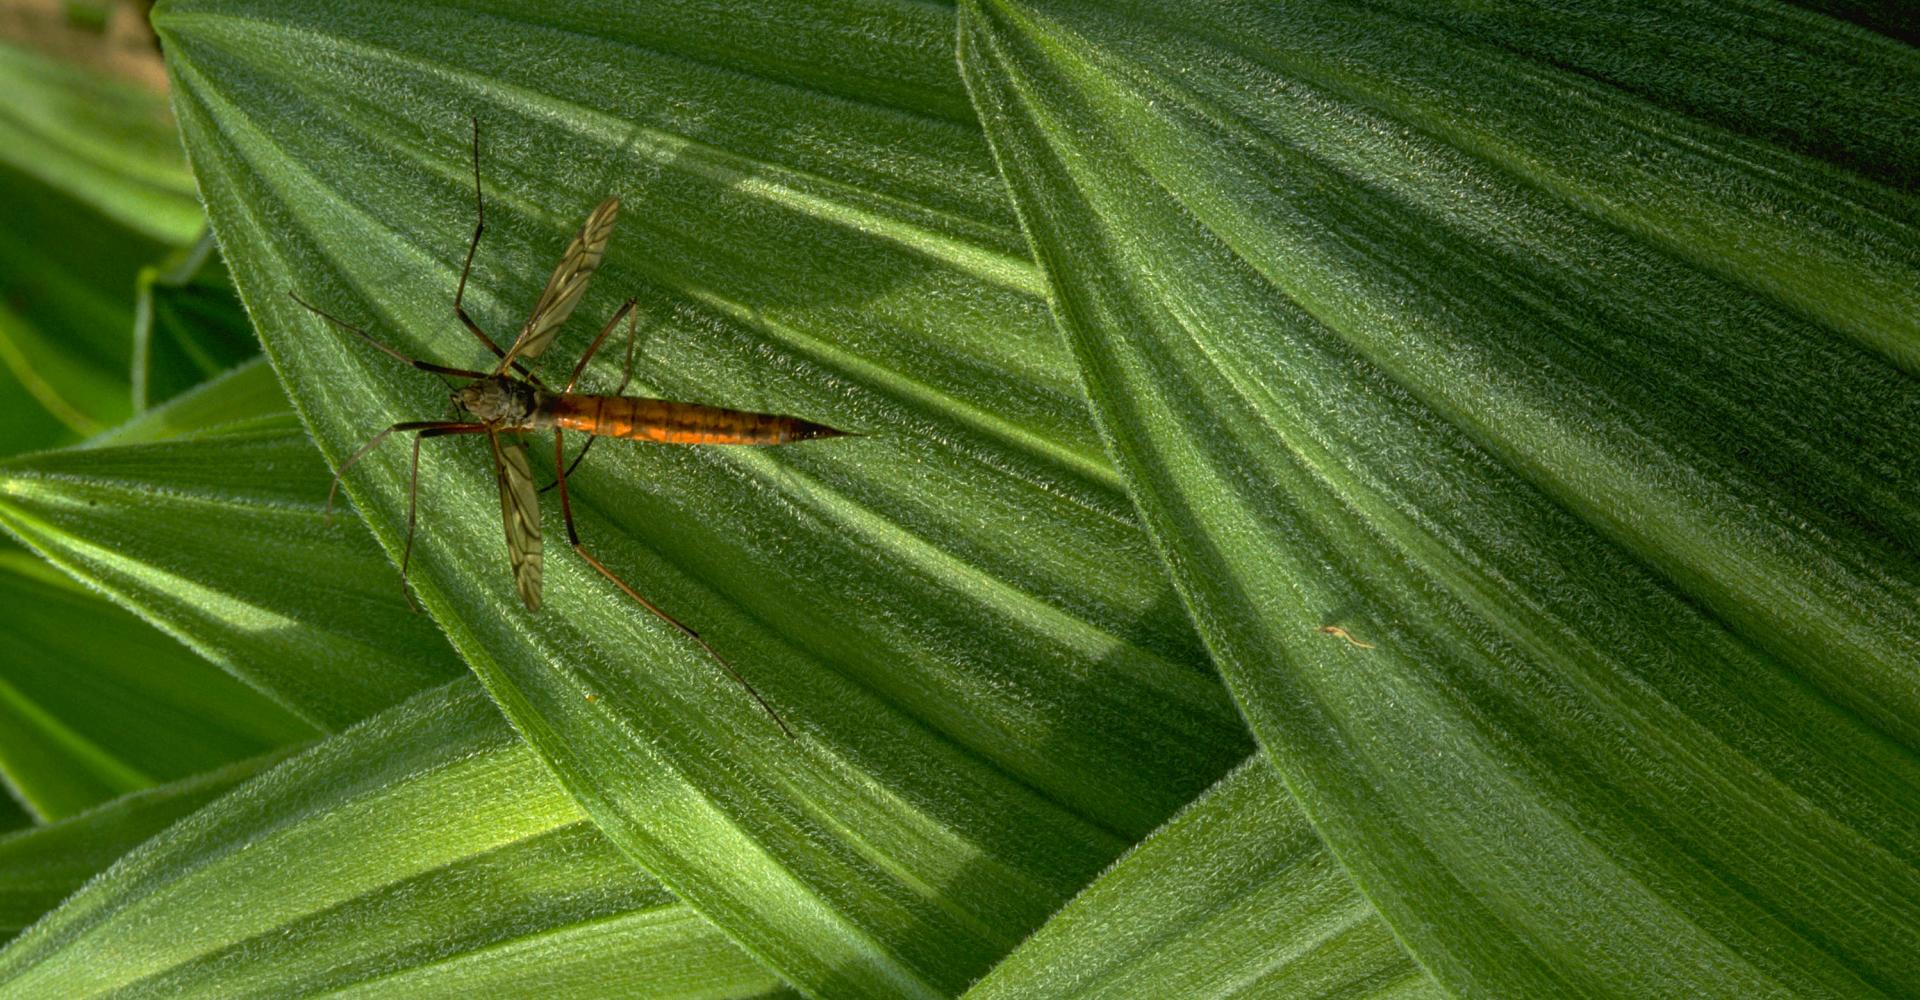 Top view, close up of insect on green leaves